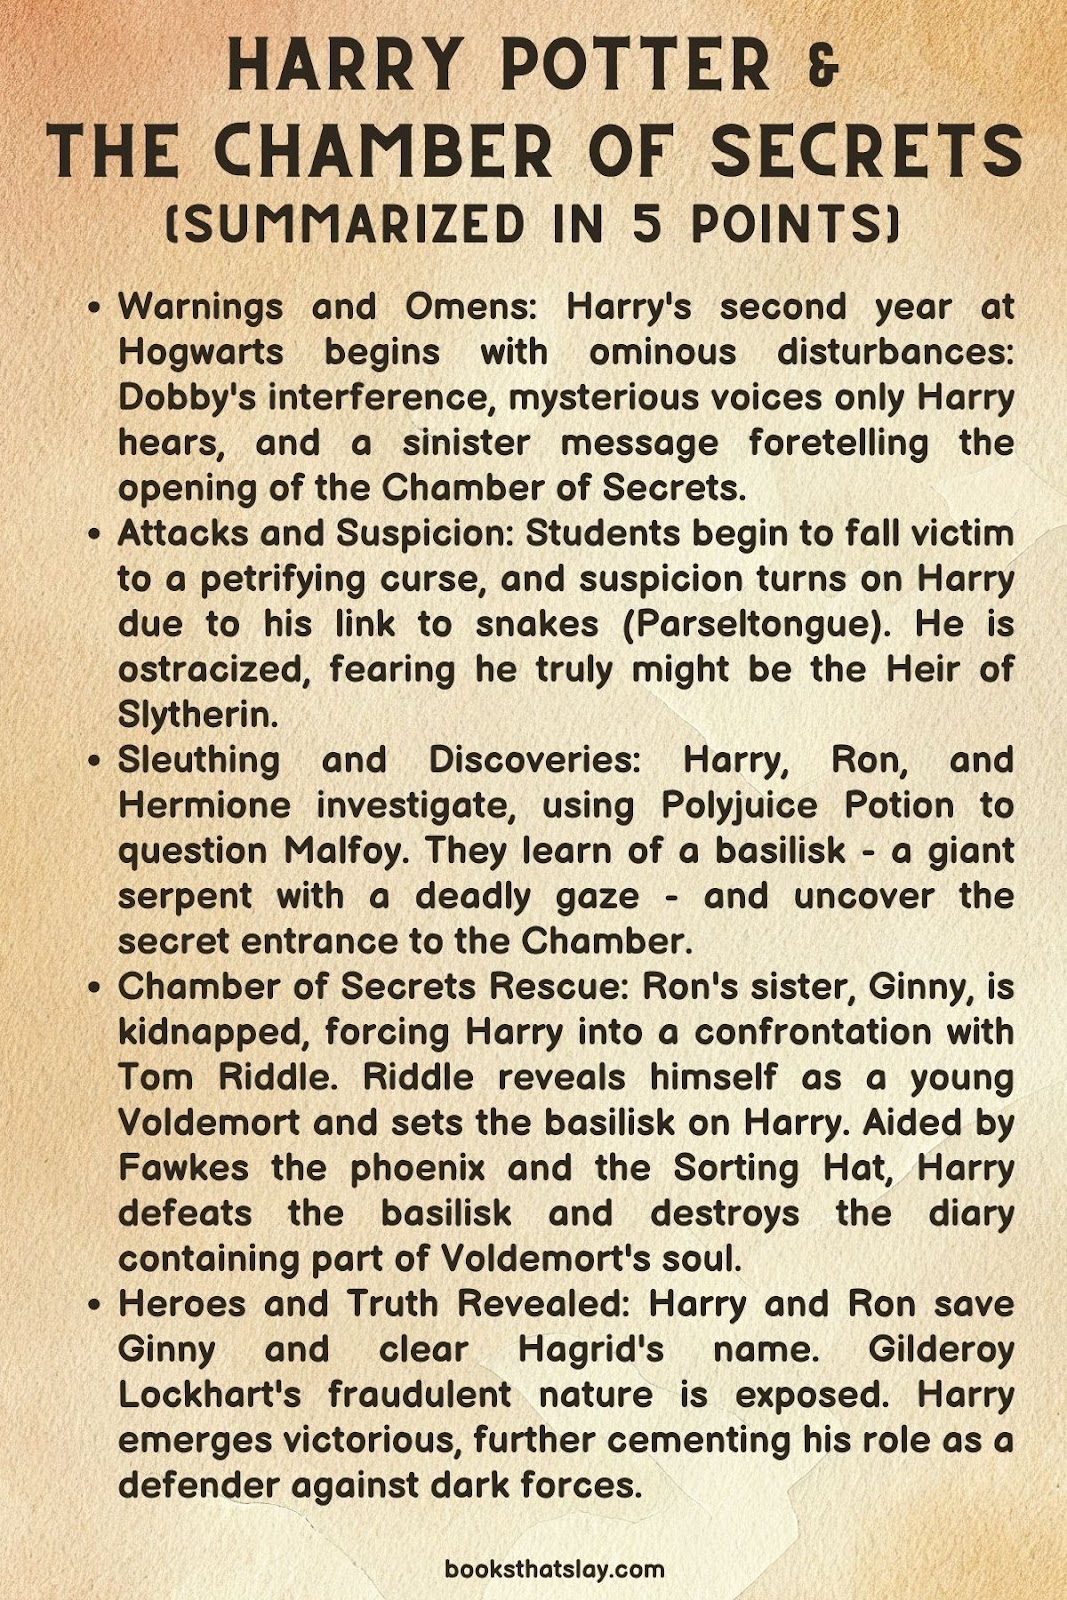 Harry Potter and The Chamber of Secrets Summary, Characters and Themes